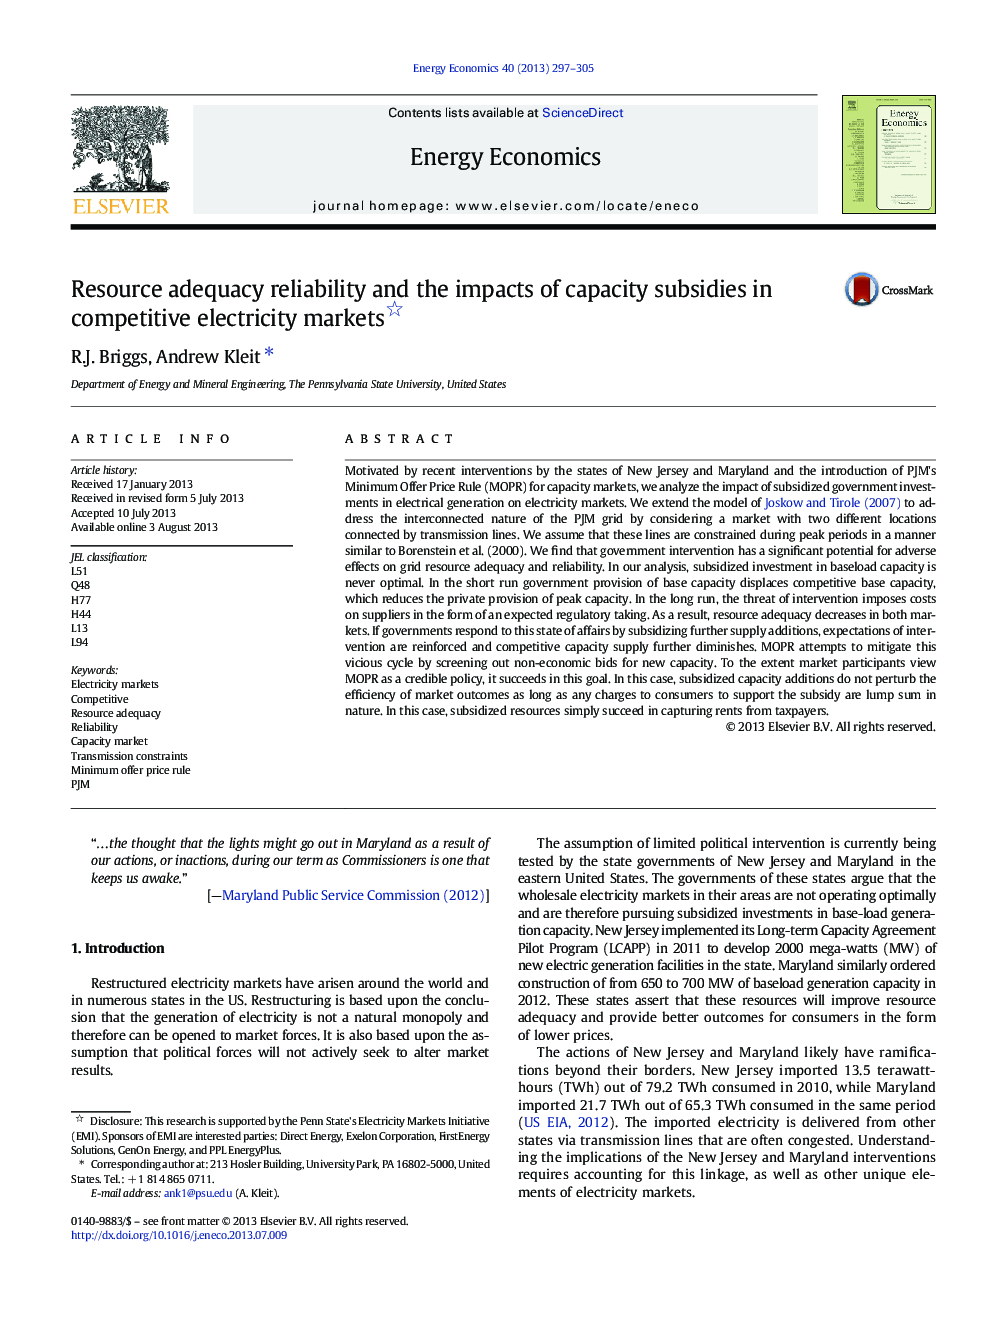 Resource adequacy reliability and the impacts of capacity subsidies in competitive electricity markets